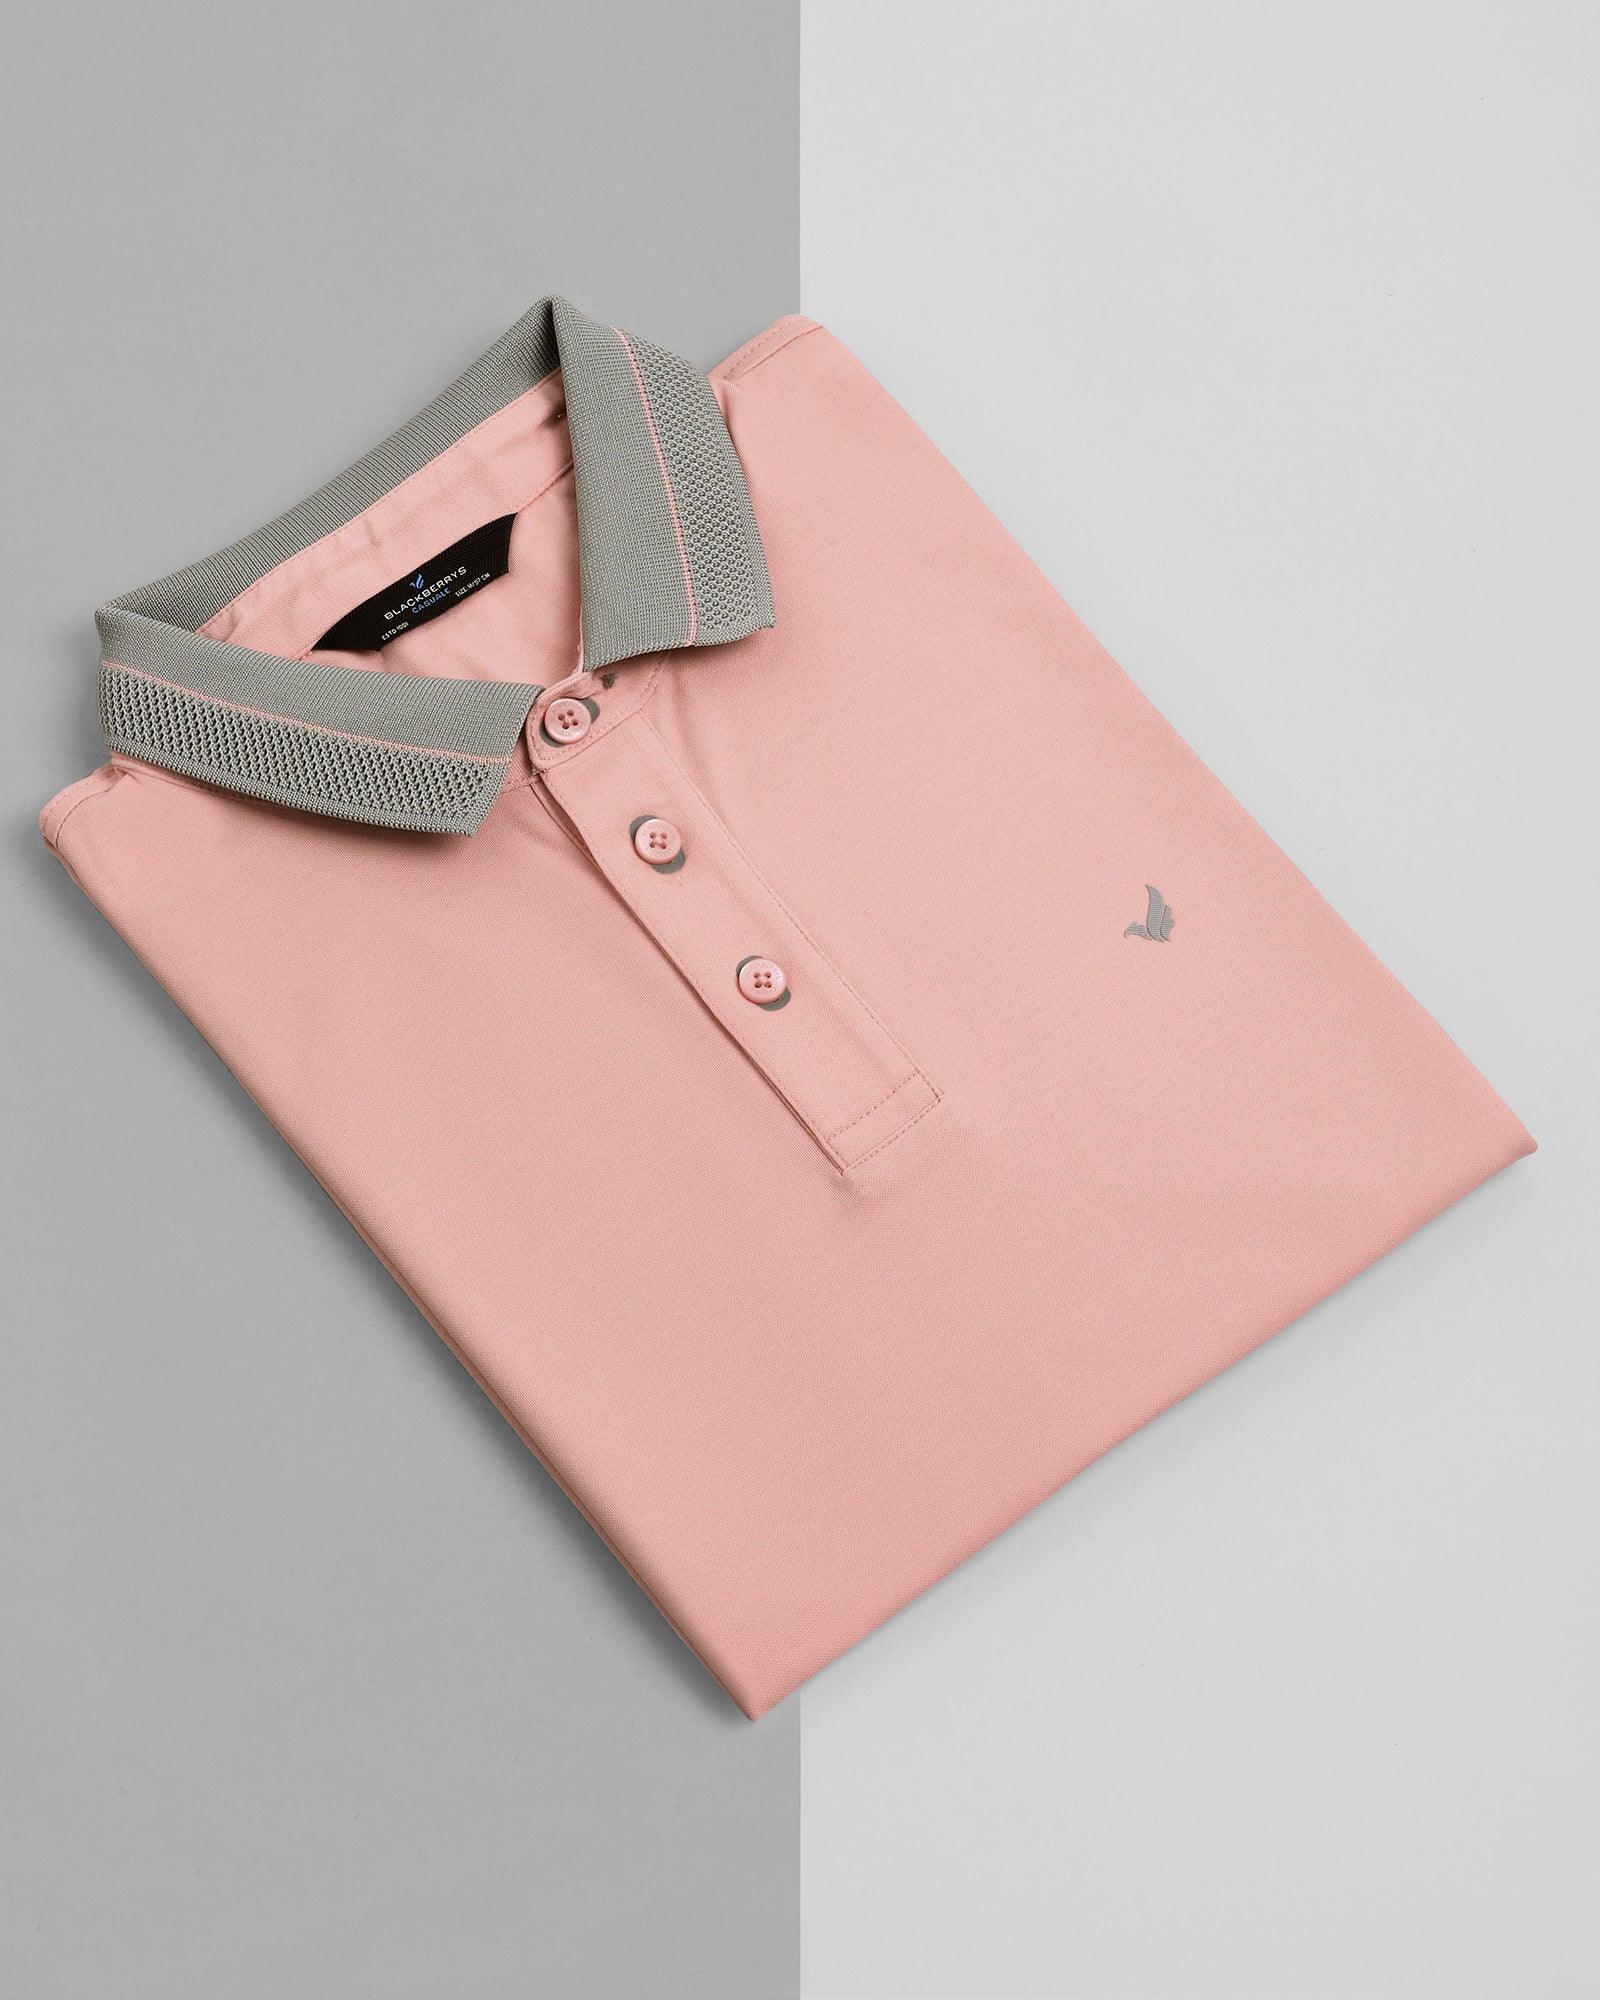 TechPro Polo Pink Solid T Shirt - Susan